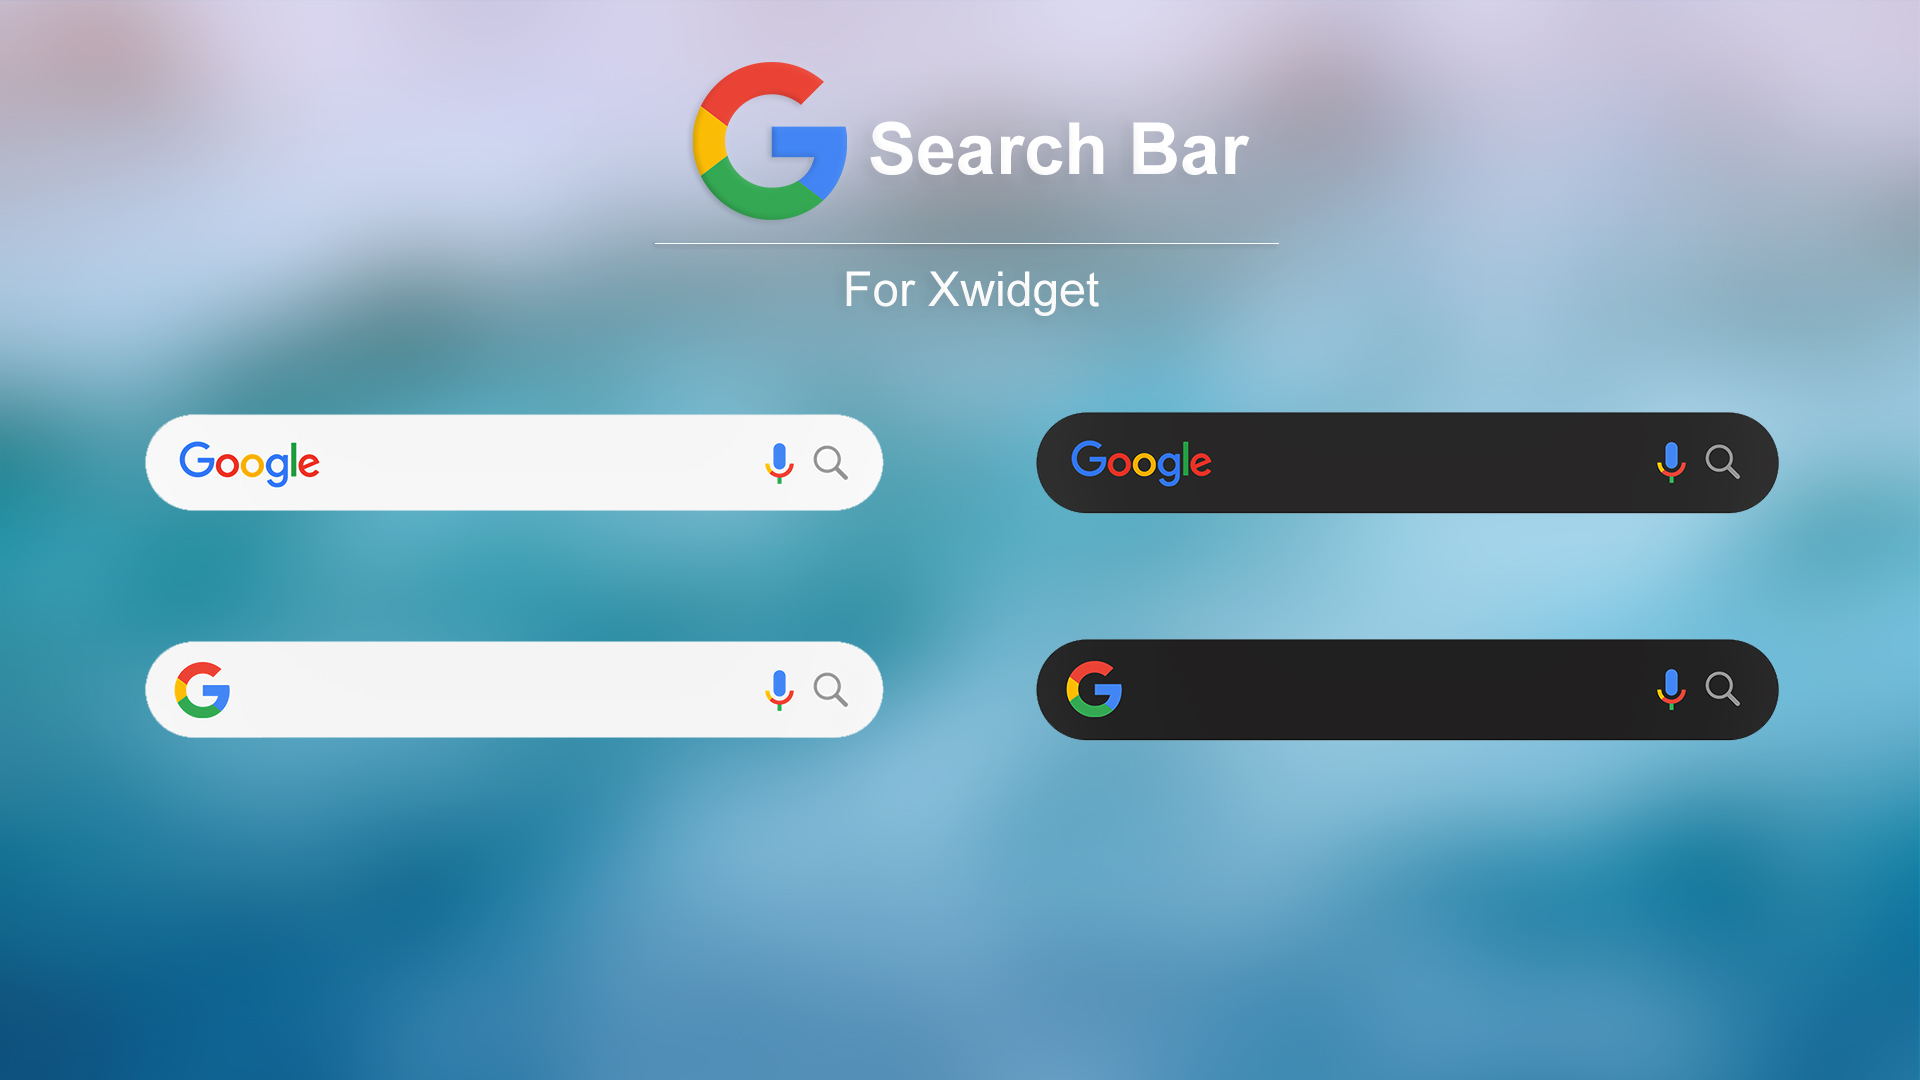 Google Search Bar For XWidget by itsusmanmirza on DeviantArt